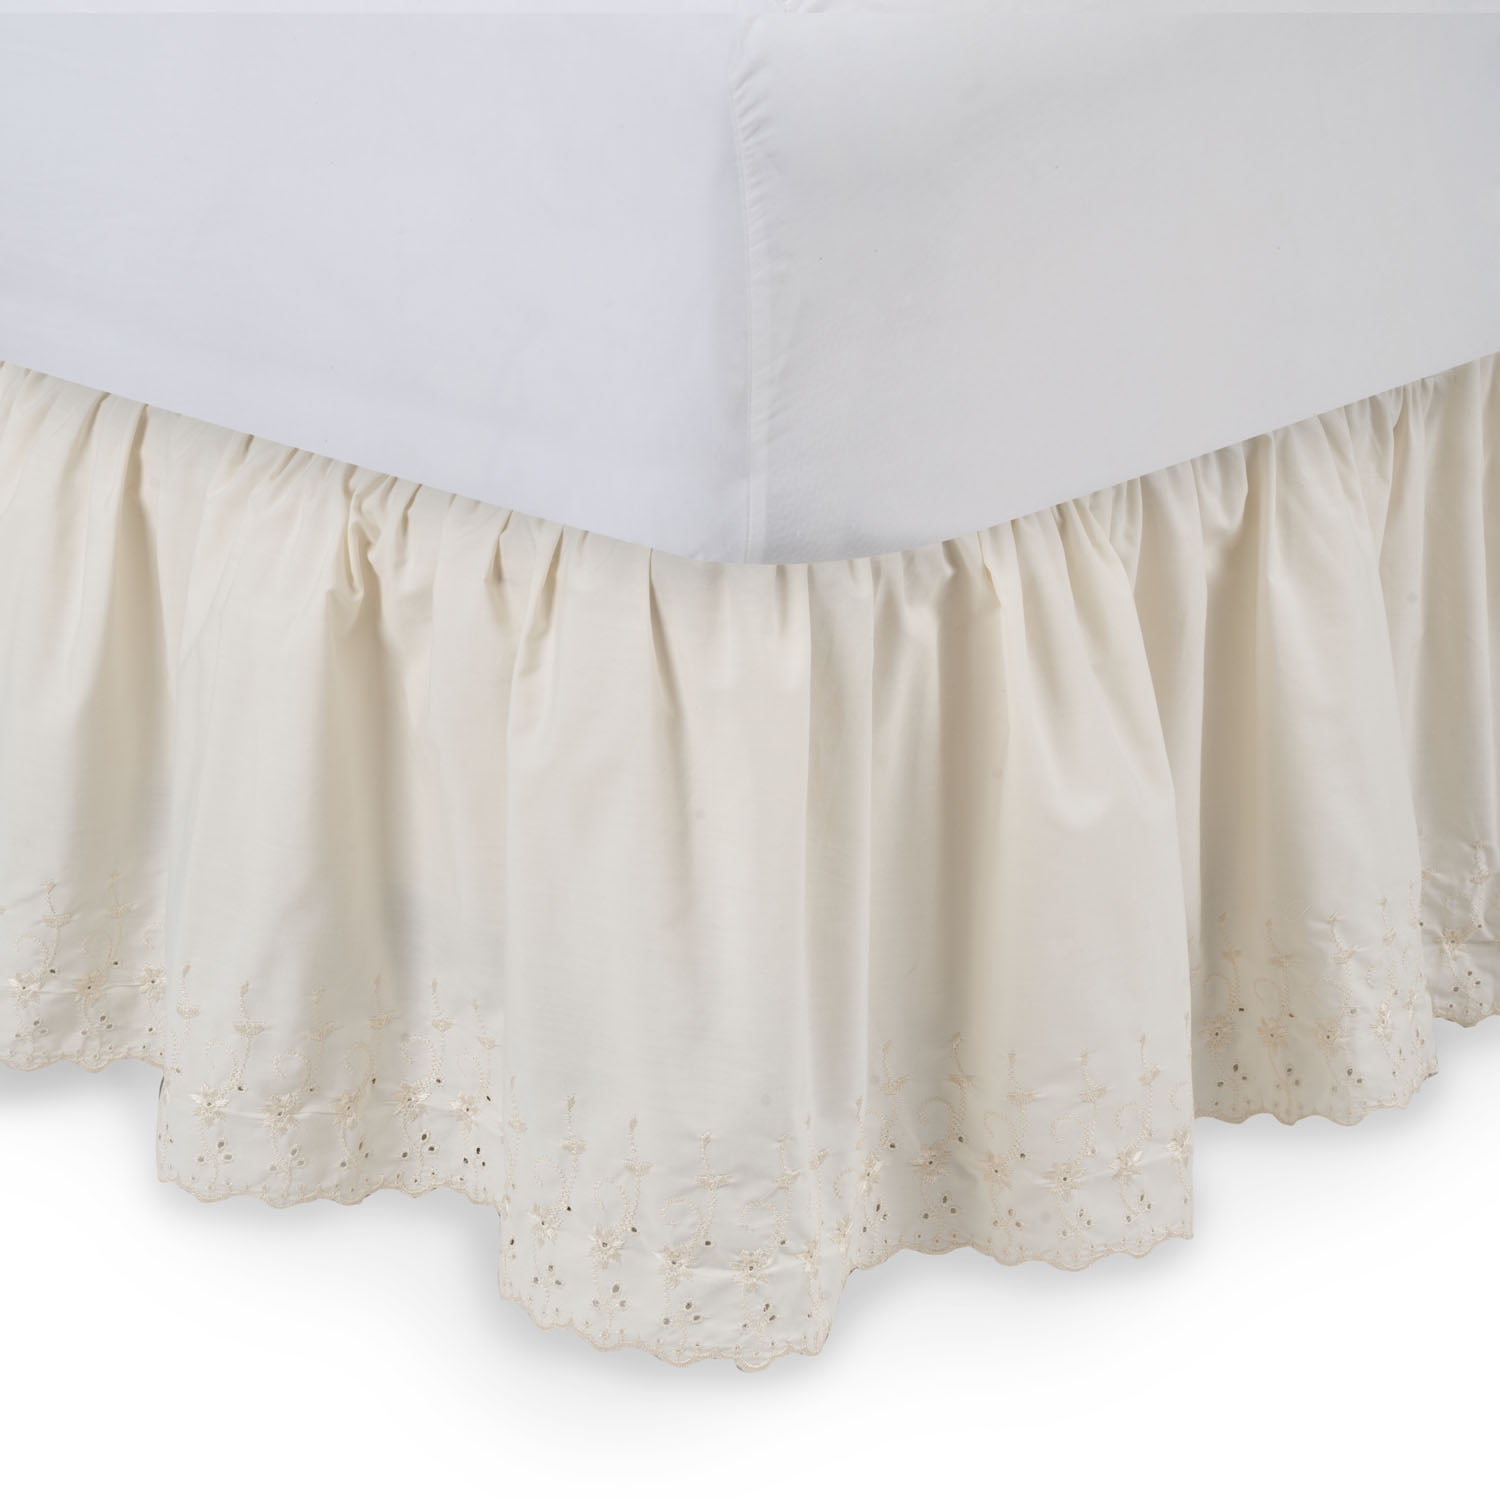 18" DROP WRAP AROUND EYELET LACE BED SKIRT DUST RUFFLE 